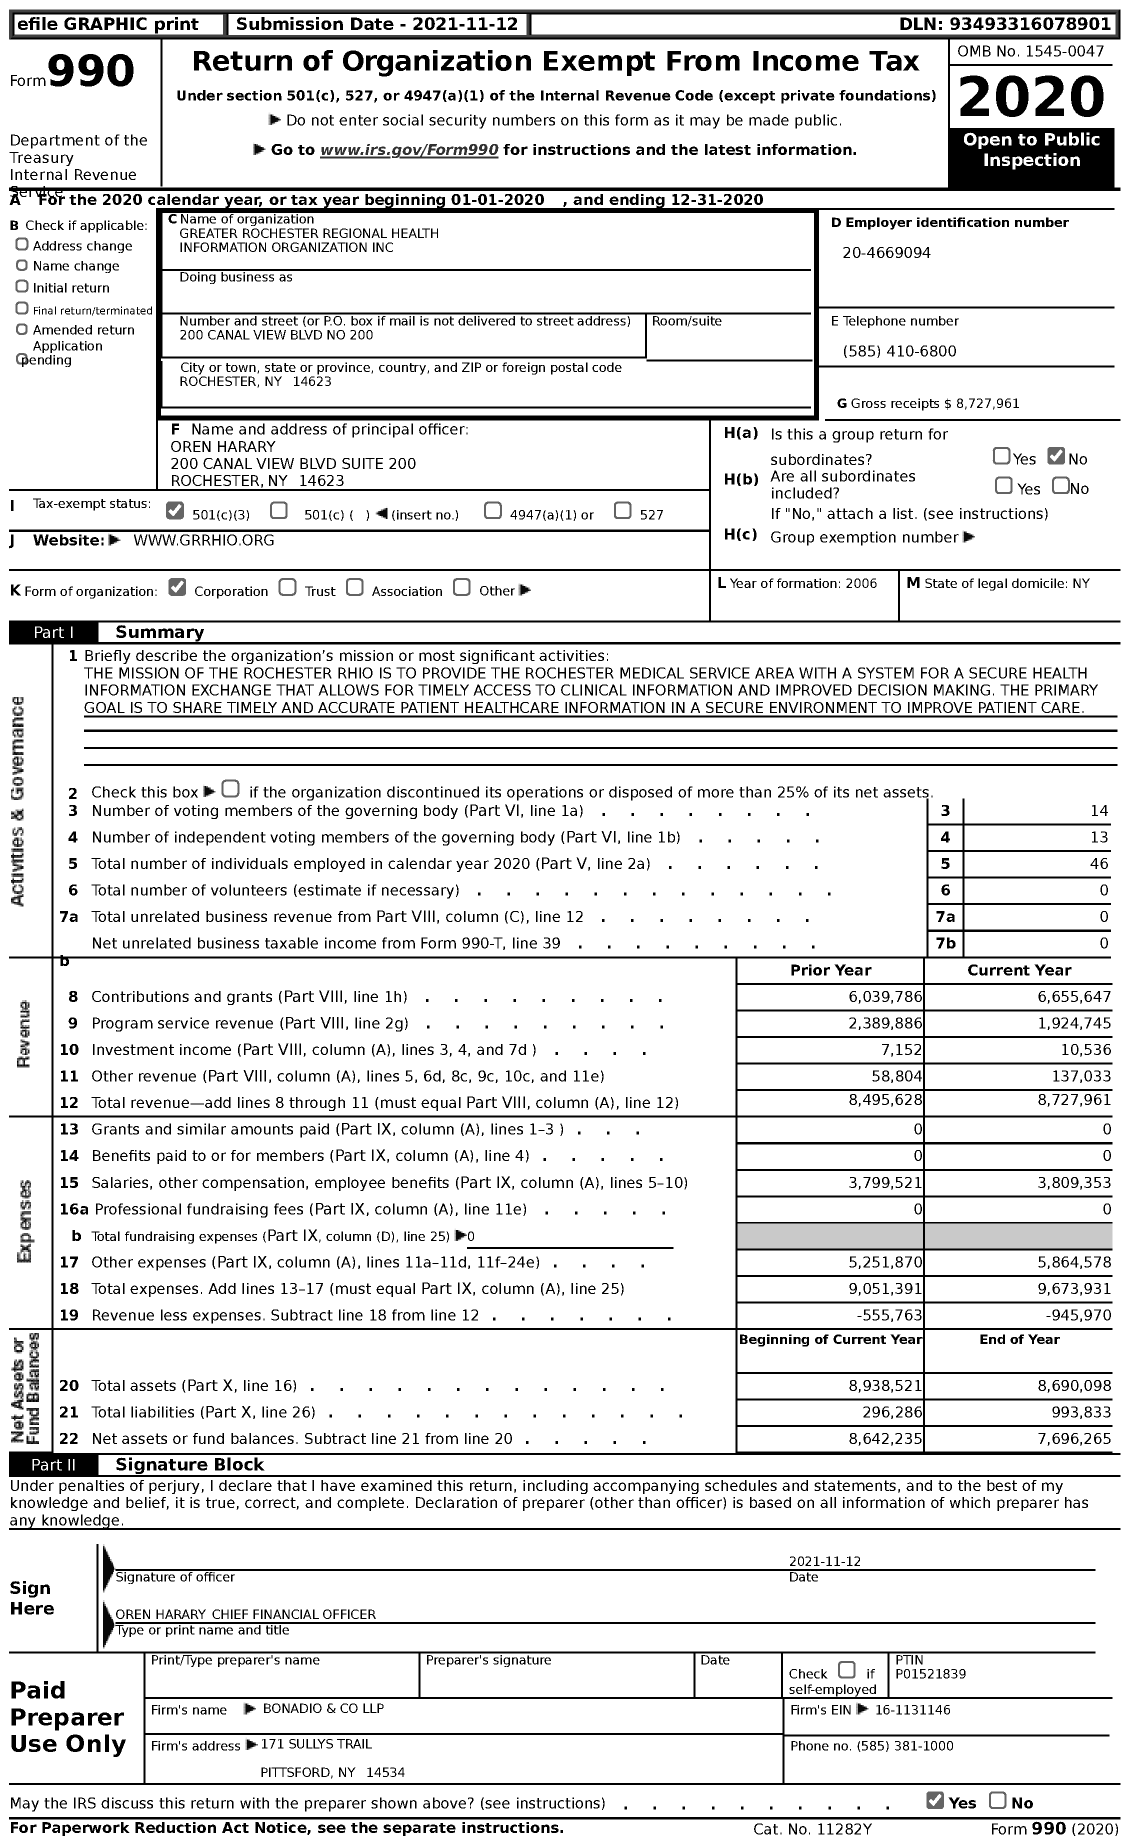 Image of first page of 2020 Form 990 for Rochester Regional Health Information Organization